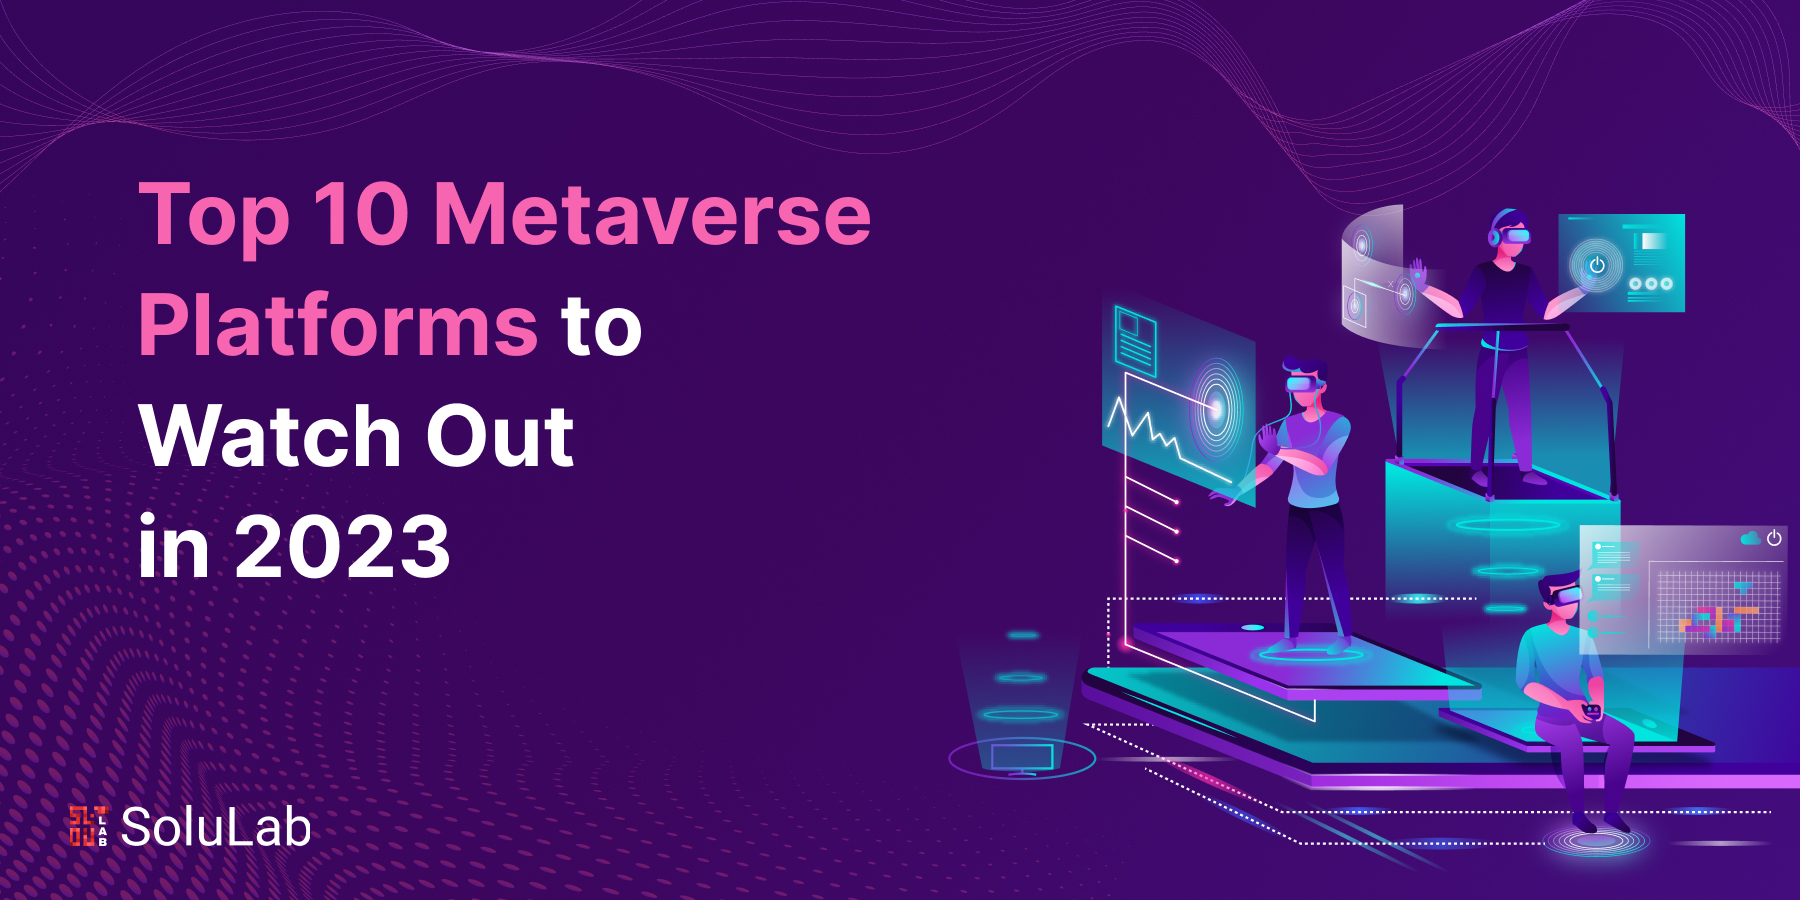 Top 10 Metaverse Platforms to Watch Out in 2023